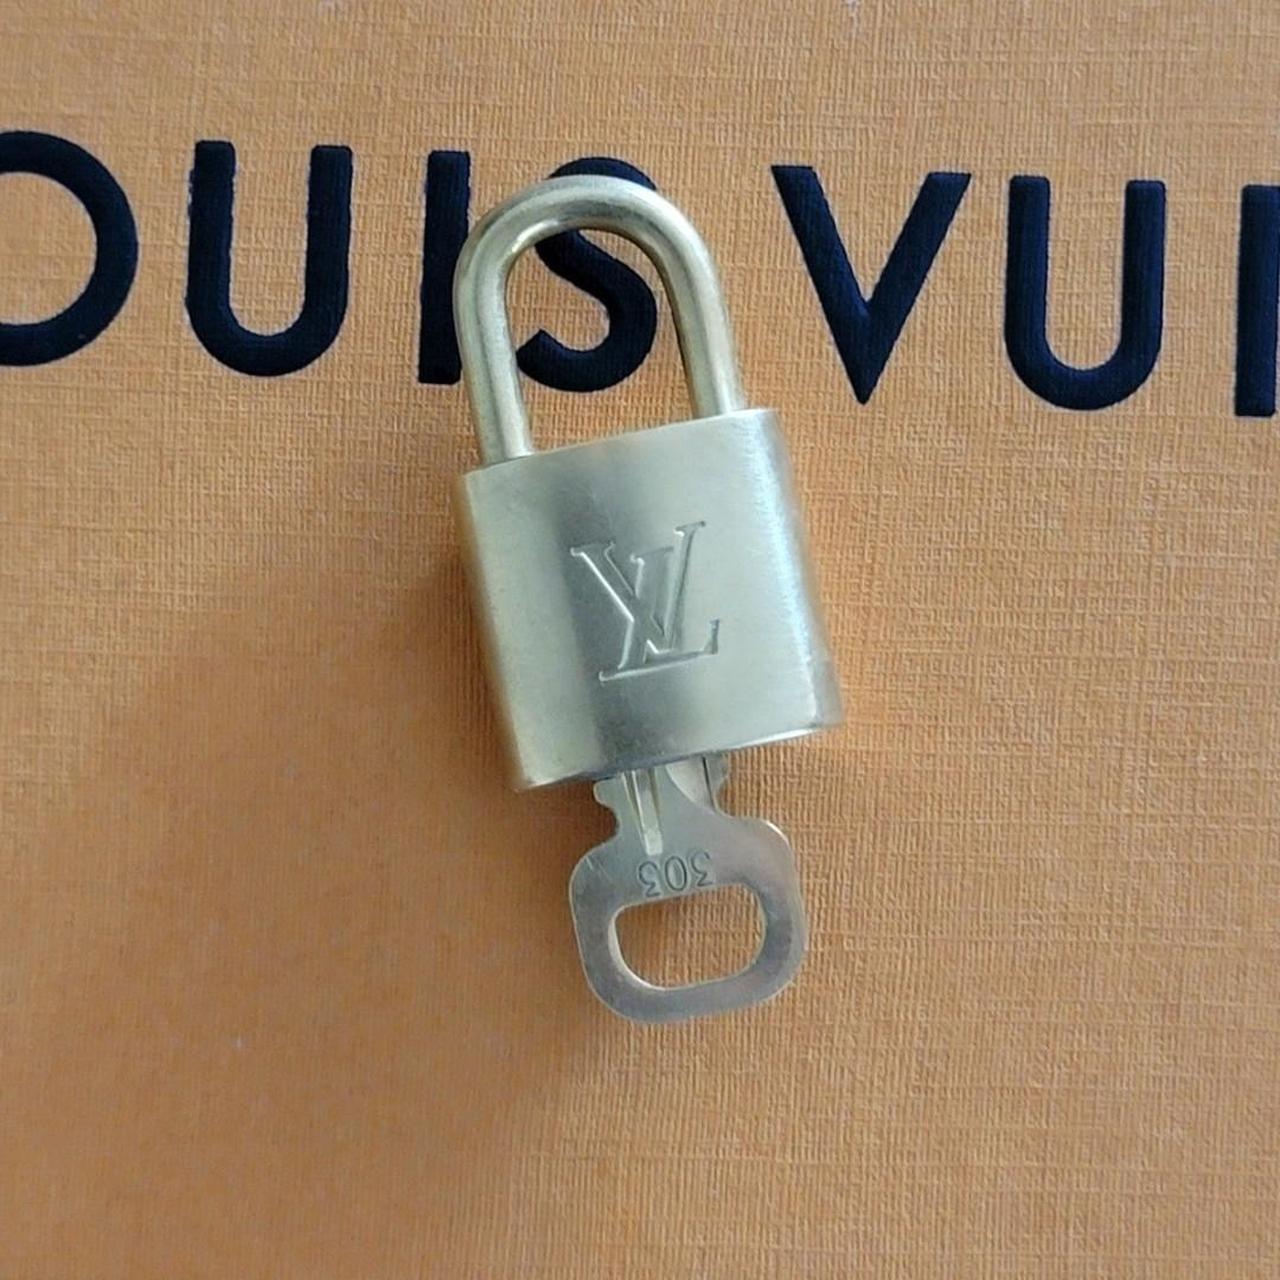 Authentic Louis Vuitton Gold Brass Lock and Key #300 - Depop